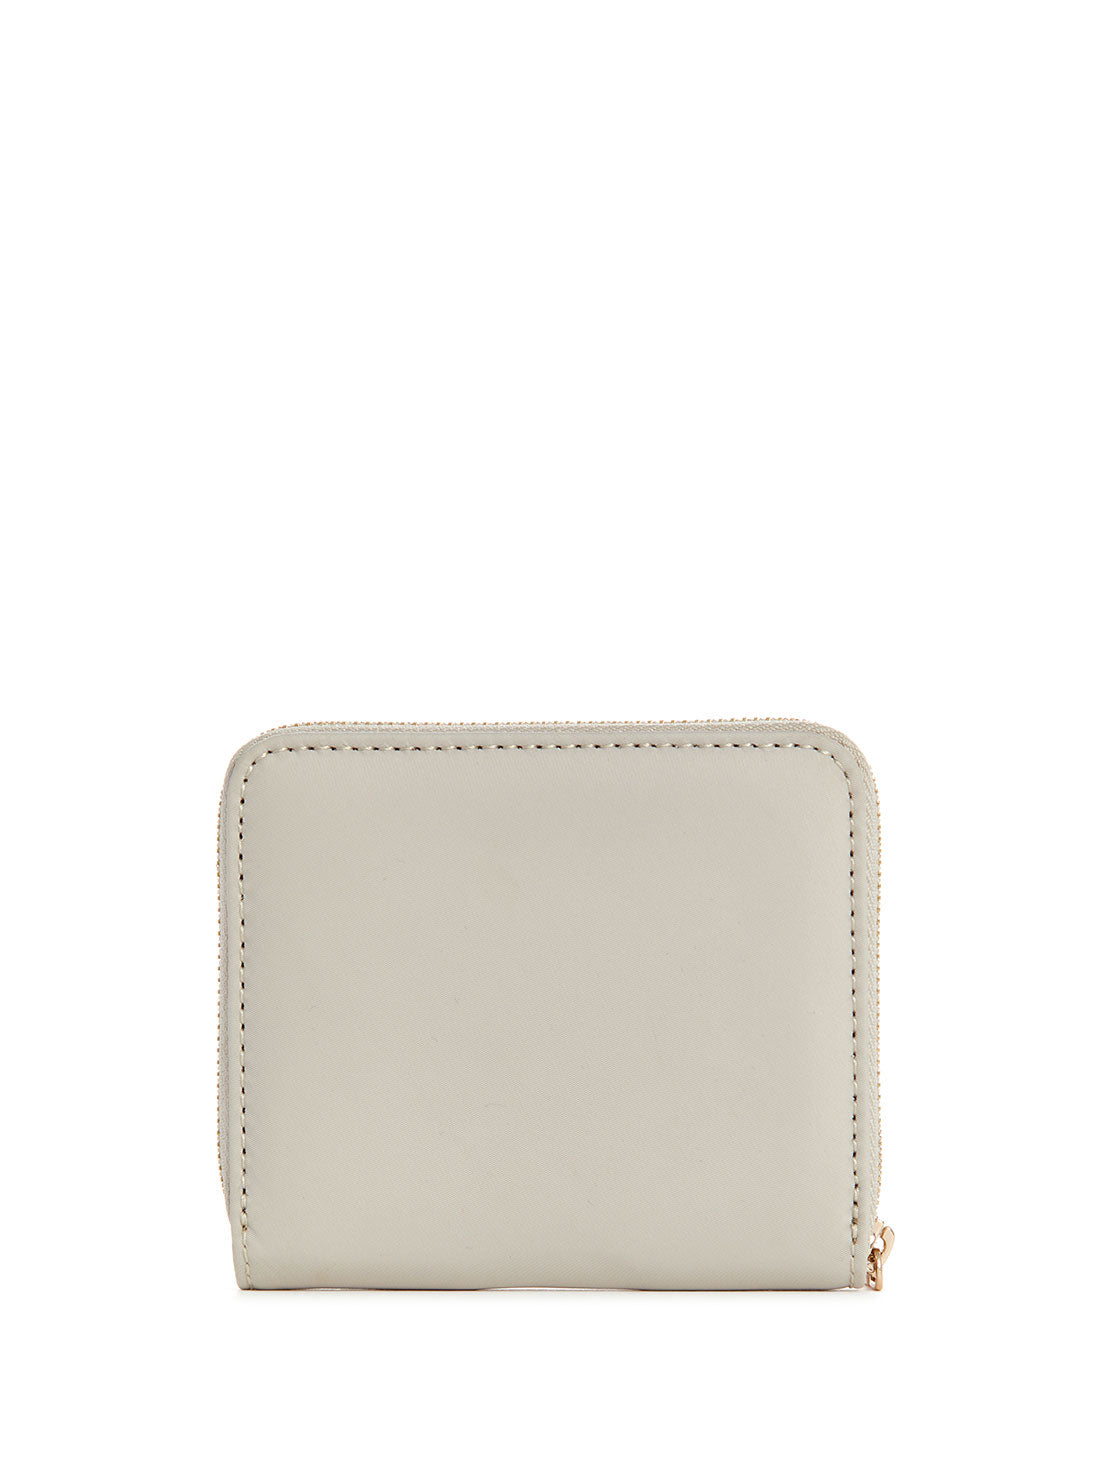 GUESS Eco Cream Beige Gemma Small Wallet back view